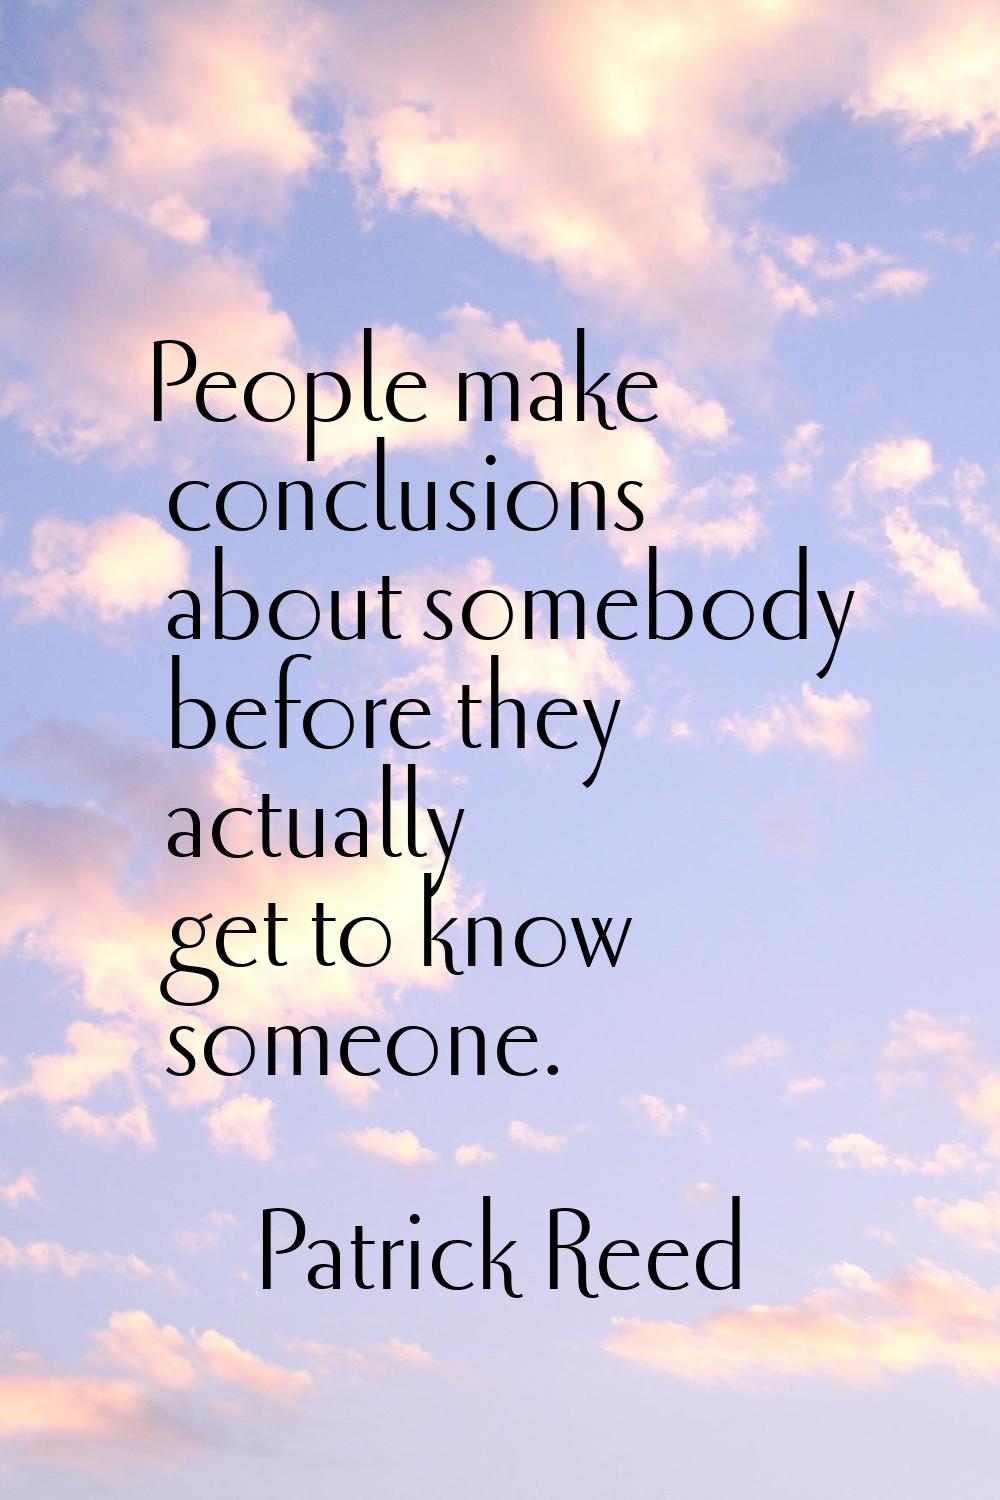 People make conclusions about somebody before they actually get to know someone.